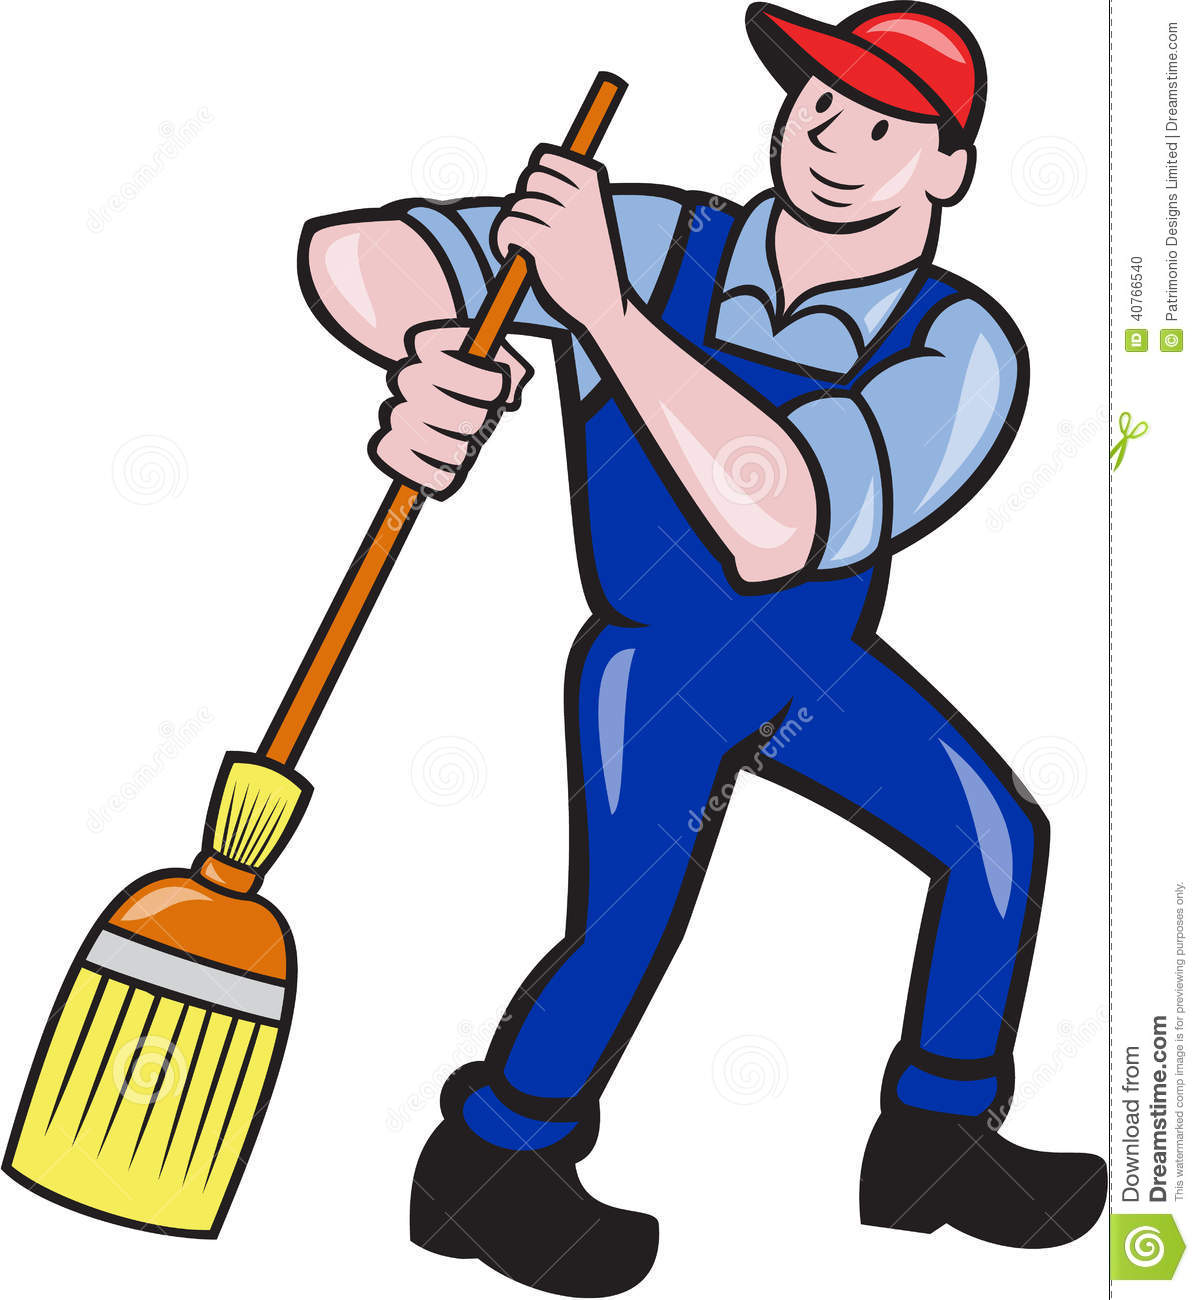 Animated janitor clipart.